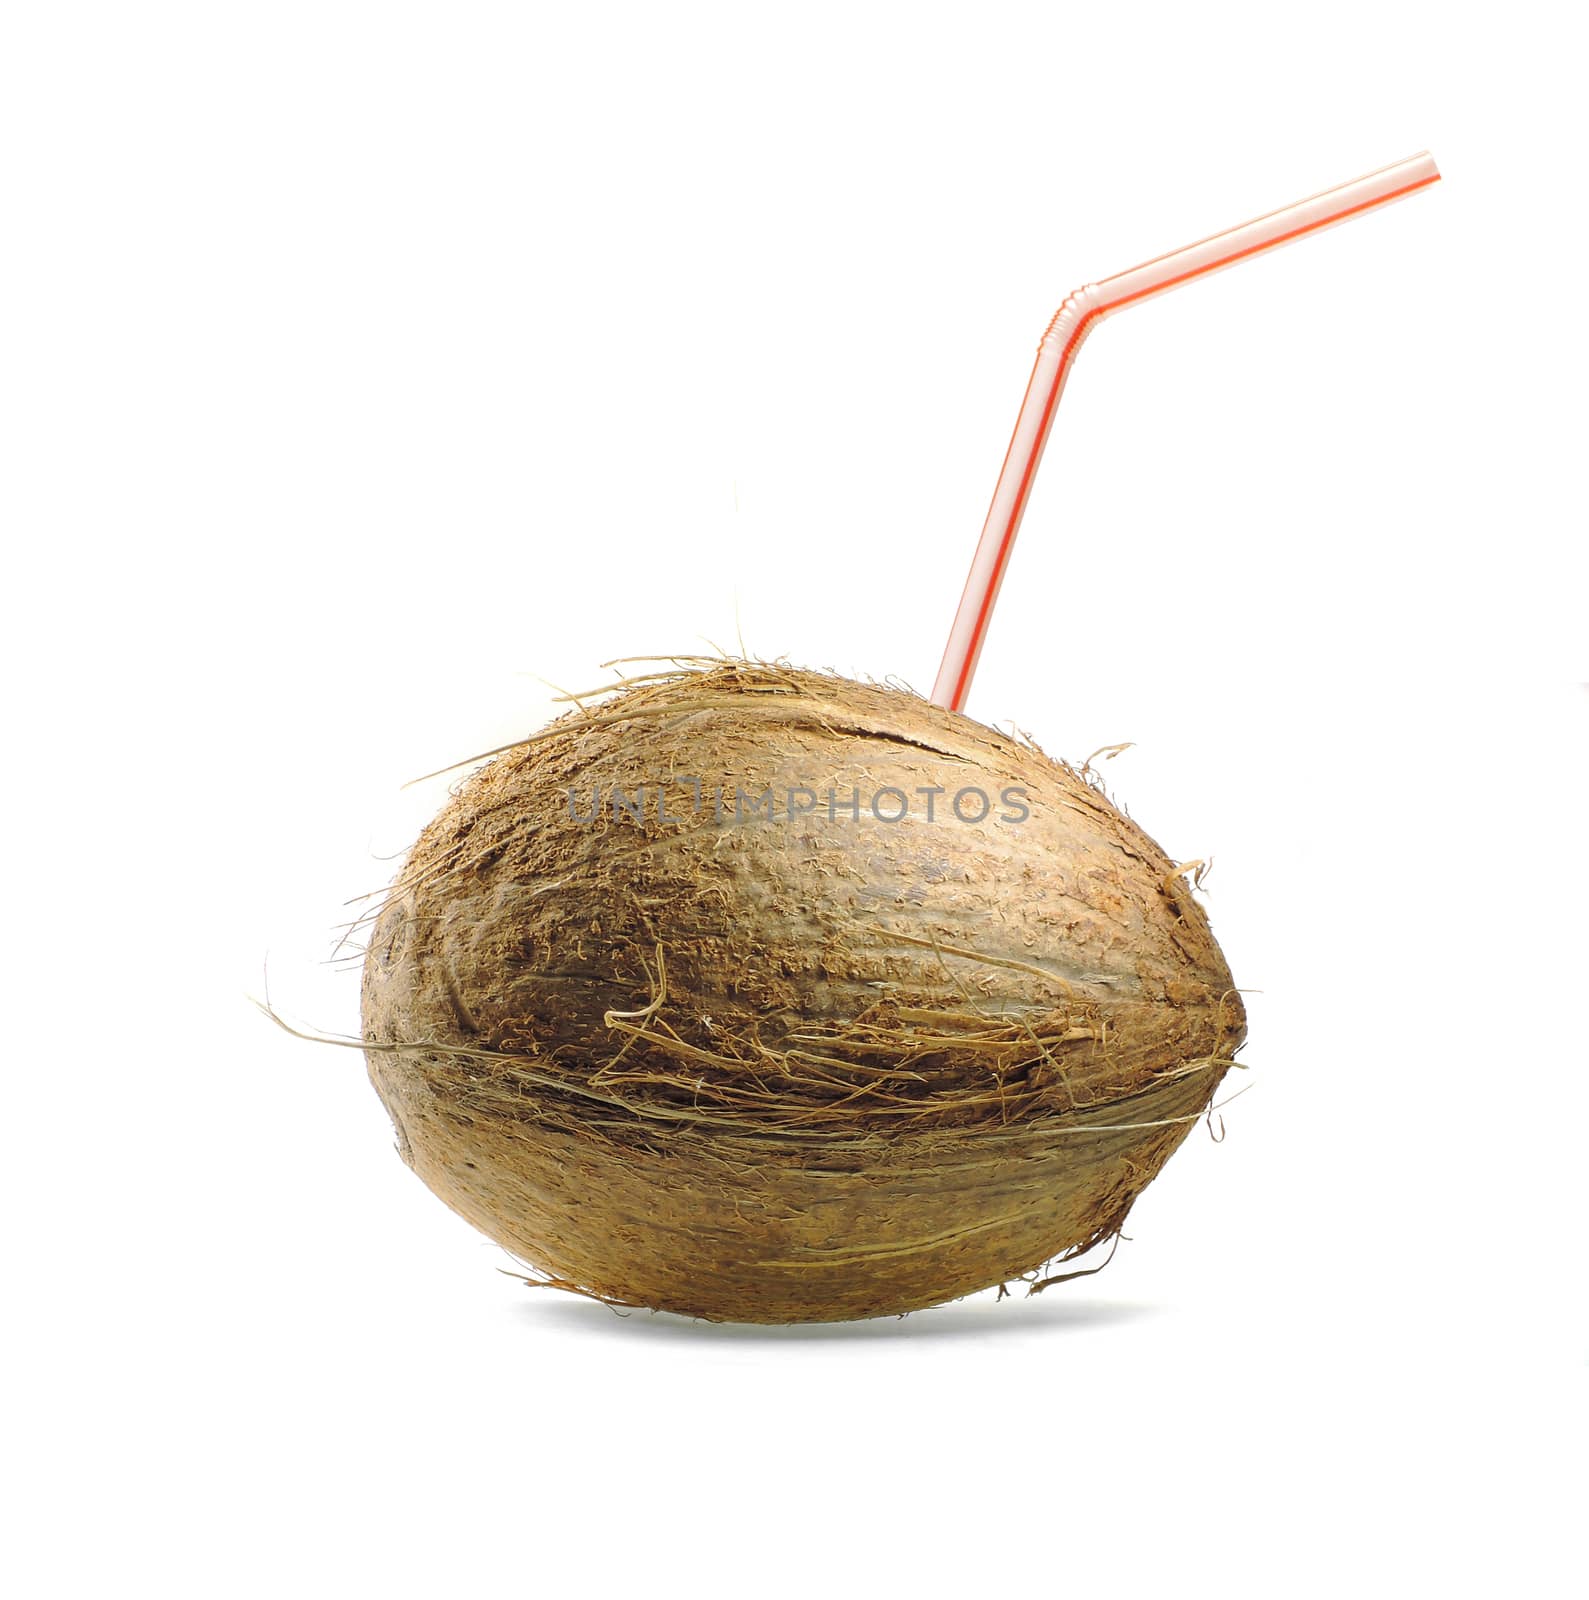 coconut on white background with cocktail straw 